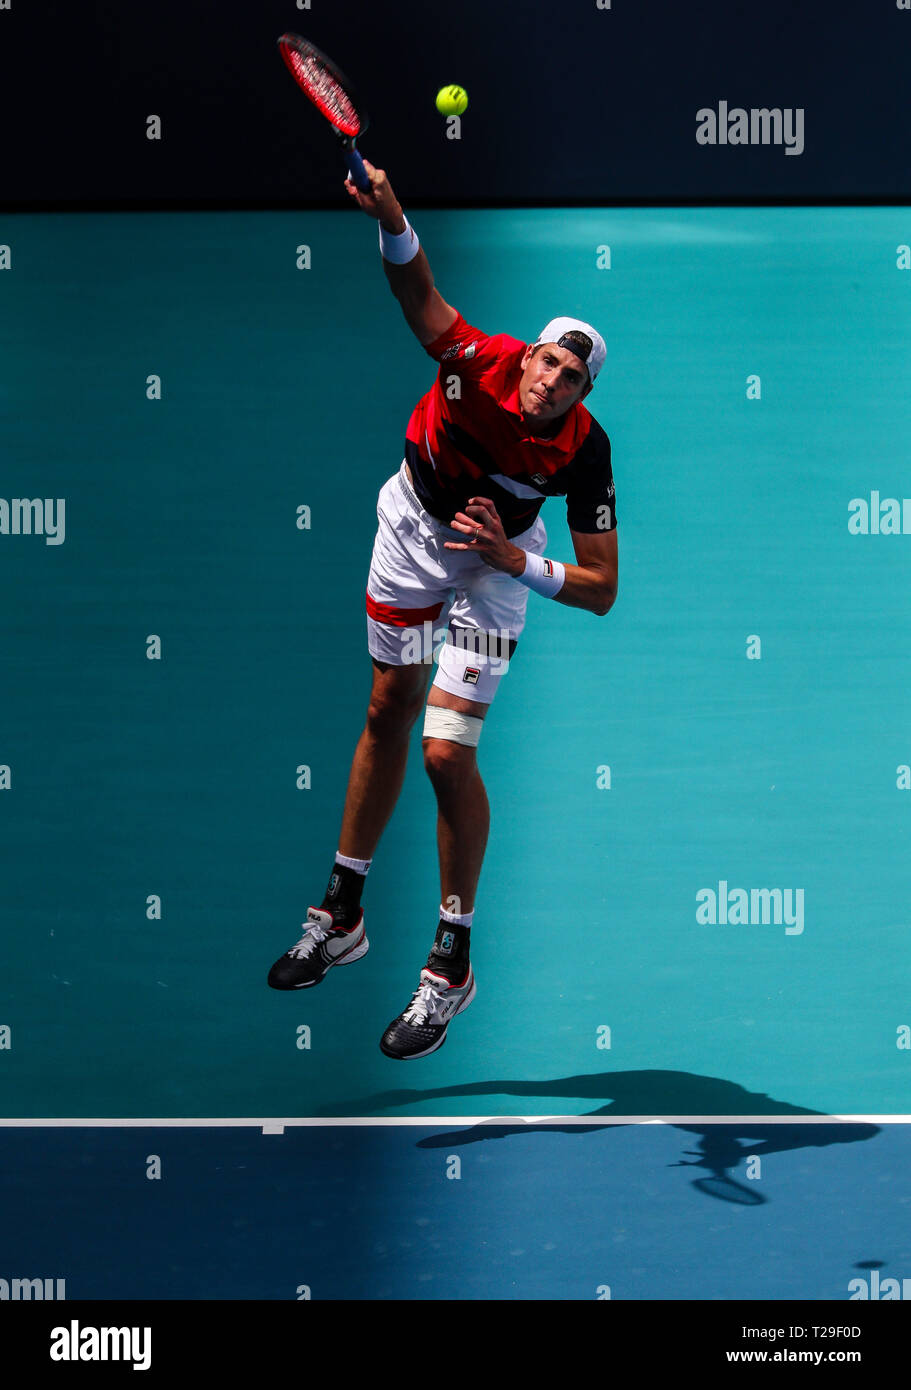 Miami Gardens, Florida, USA. 31st Mar, 2019. John Isner, of the United States, serves against Roger Federer, of Switzerland, in the Men's Singles final of the 2019 Miami Open Presented by Itau professional tennis tournament, played at the Hardrock Stadium in Miami Gardens, Florida, USA. Federer won 6-1, 6-4. Mario Houben/CSM/Alamy Live News Stock Photo